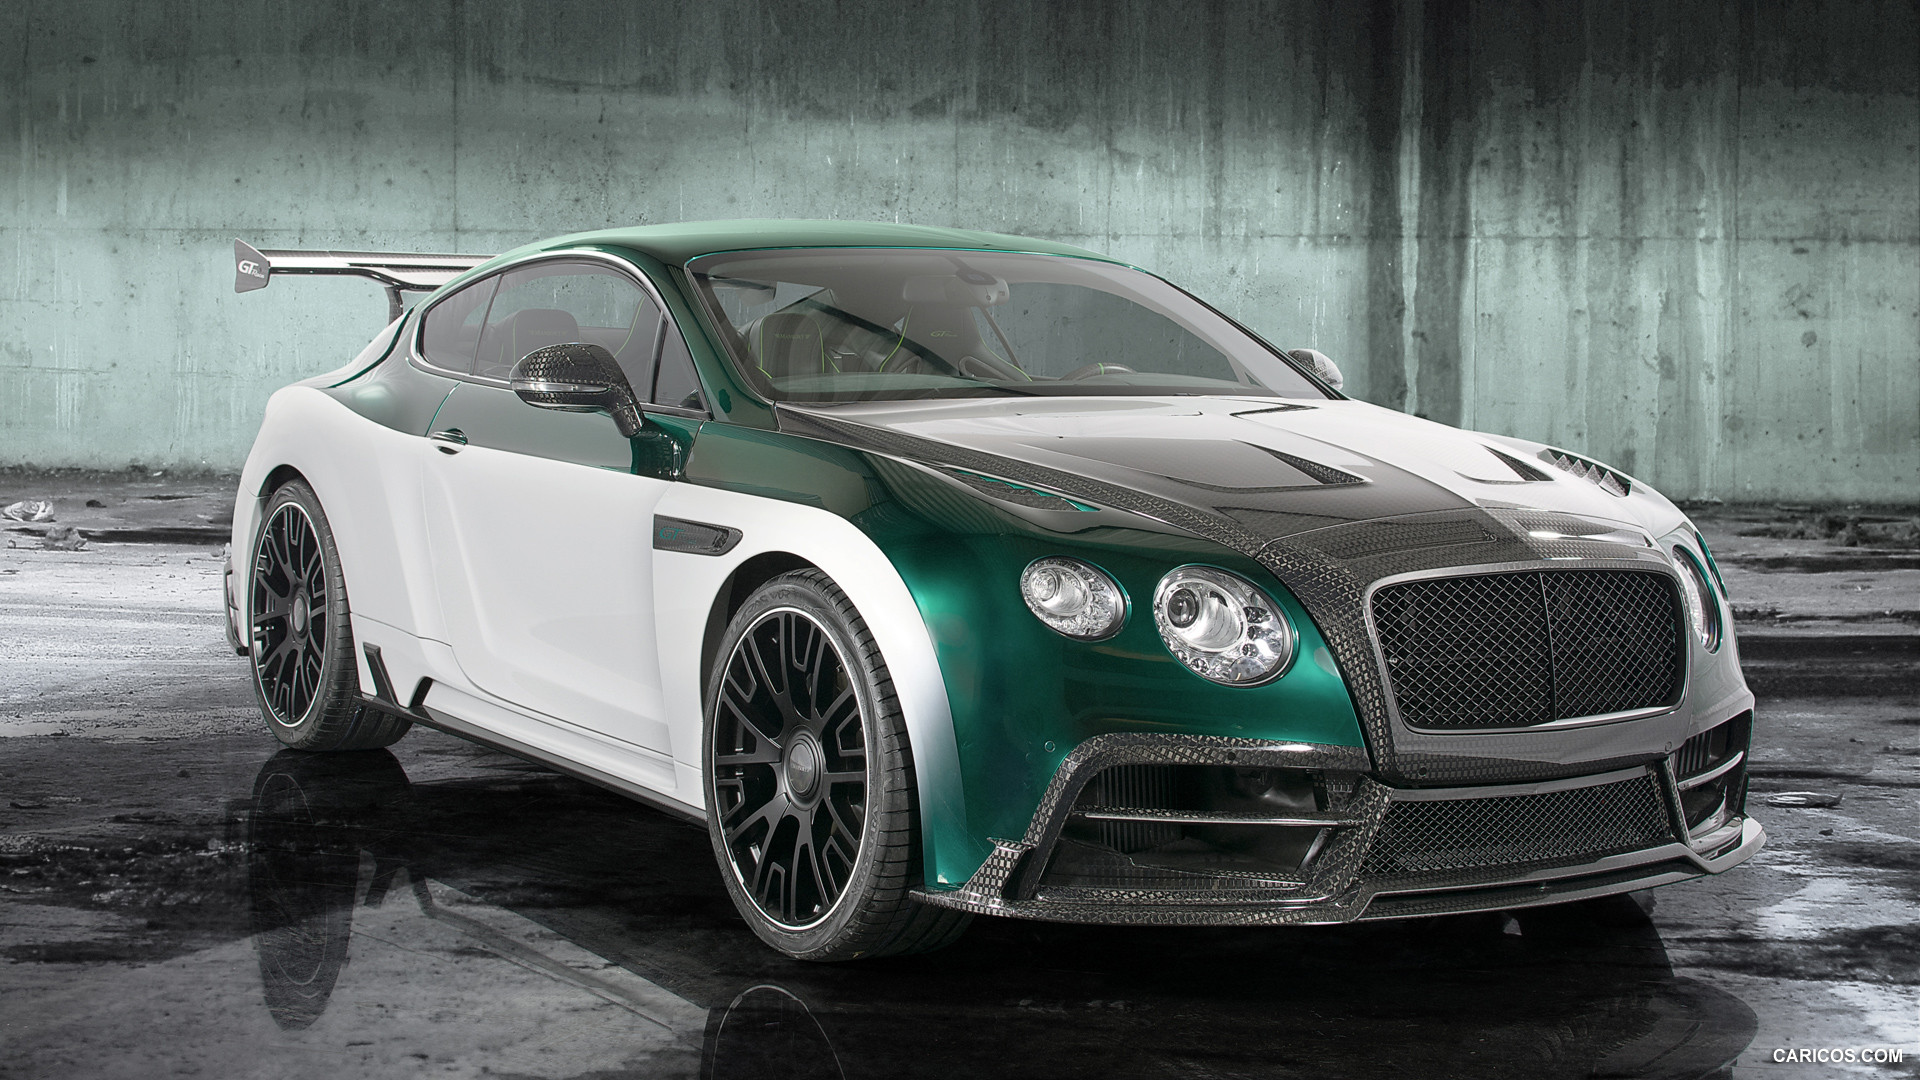 2015 Mansory GT Race based on Bentley Continental GT  - Front, #1 of 7